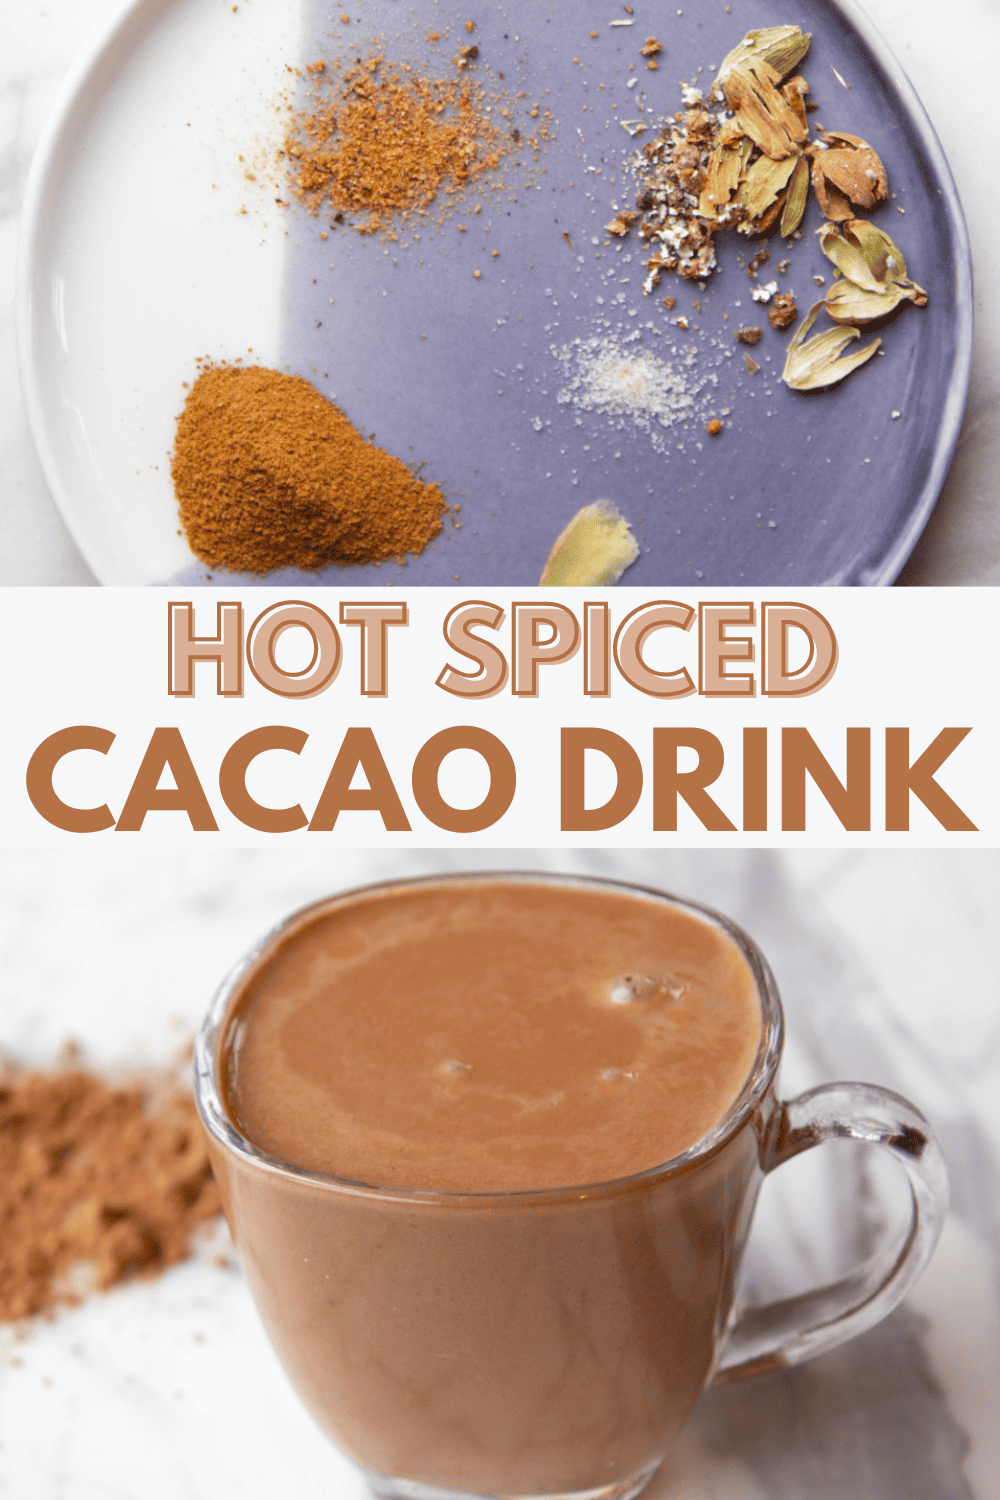 Hot Spiced Cacao Drink